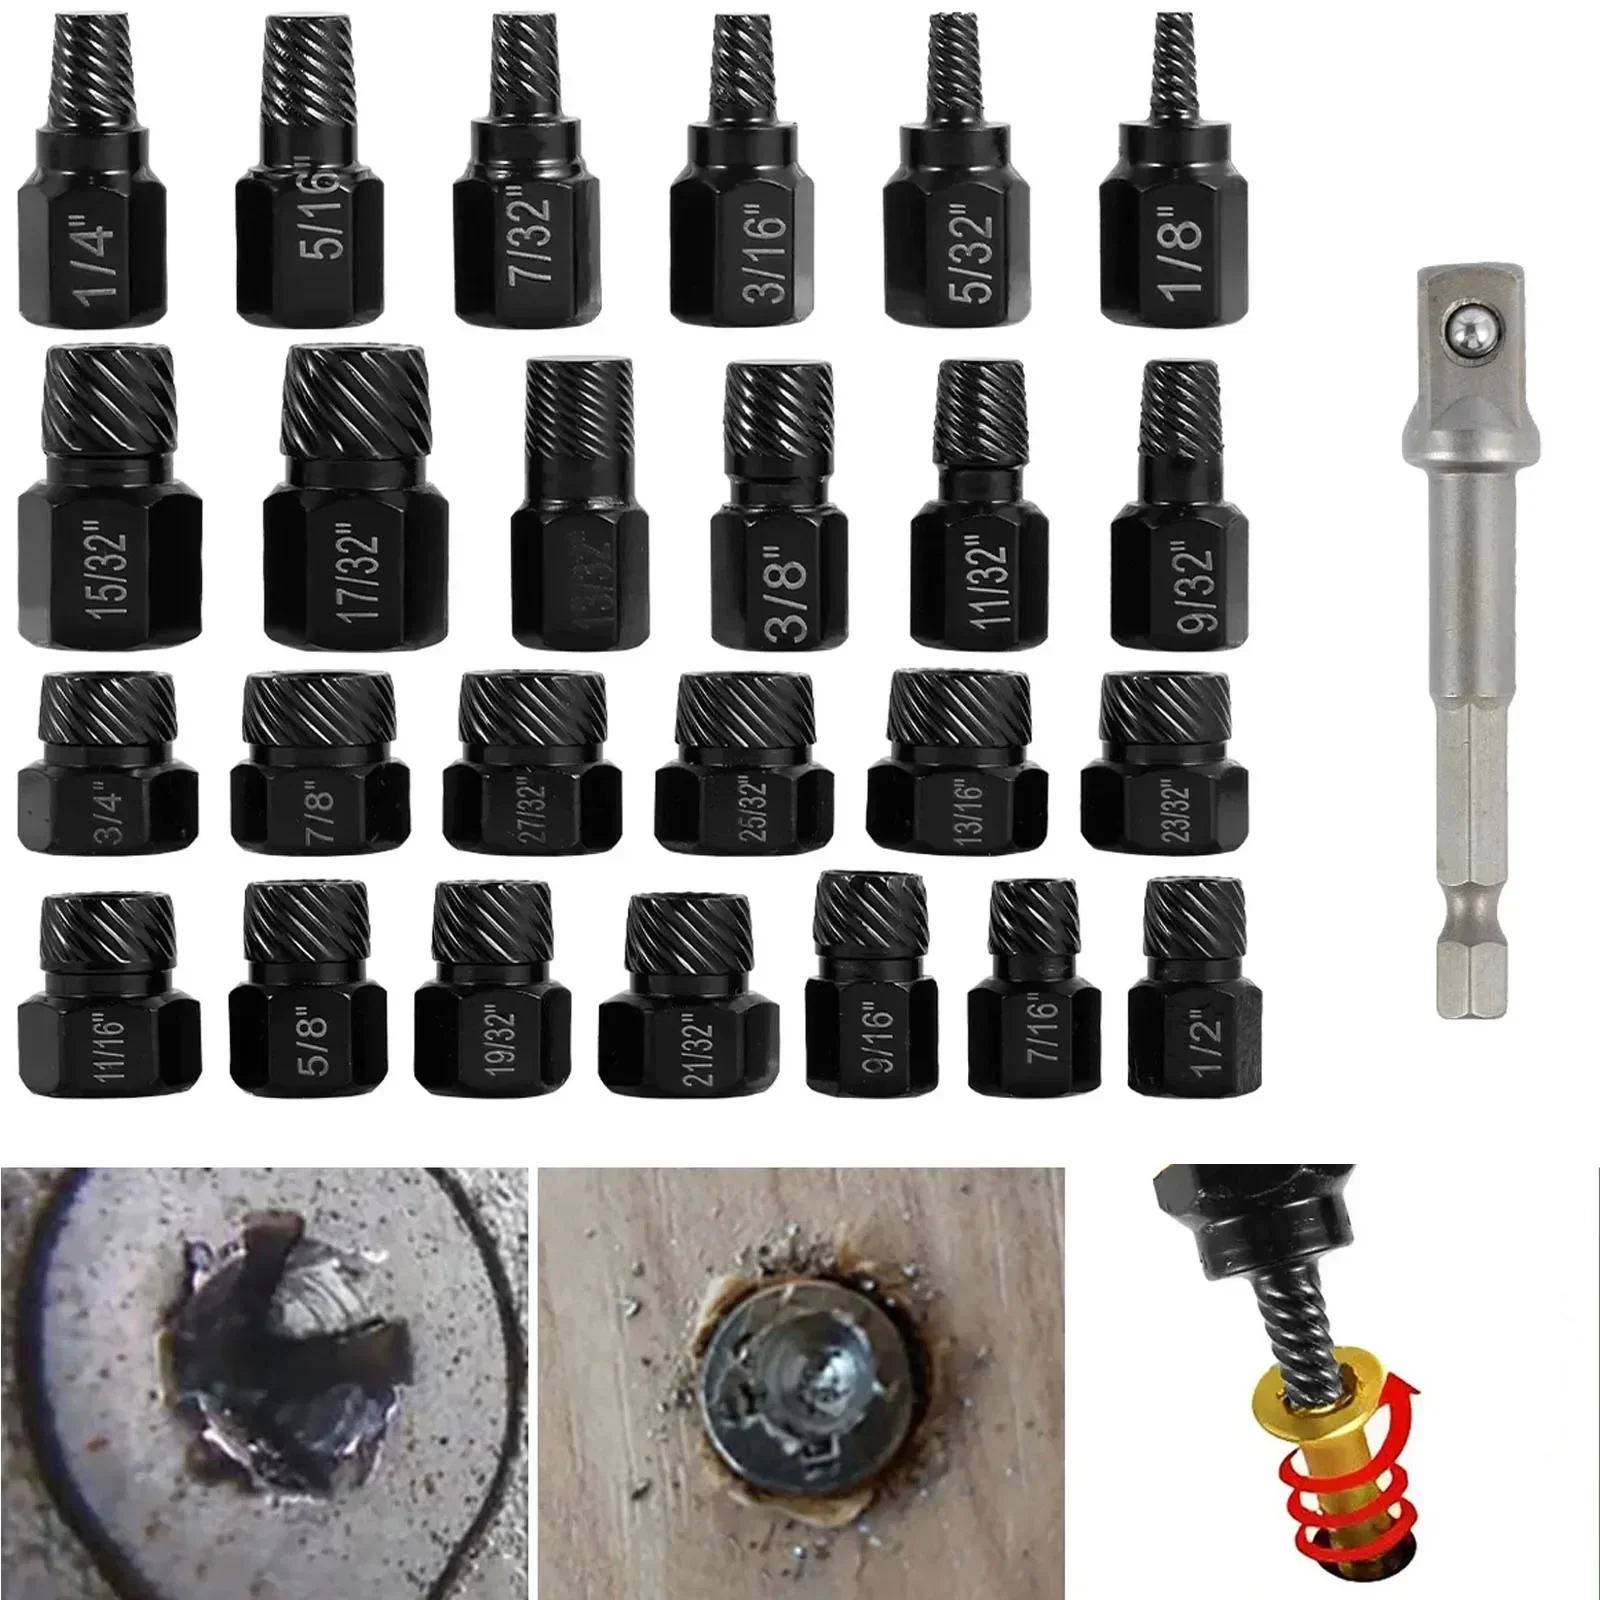 

26/10Pcs Damaged Screw Extractor 3/8inch Drive Rusted Screw Remover Tool Bolt Nut Extractor Set Broken Screw Stud Removal Kit